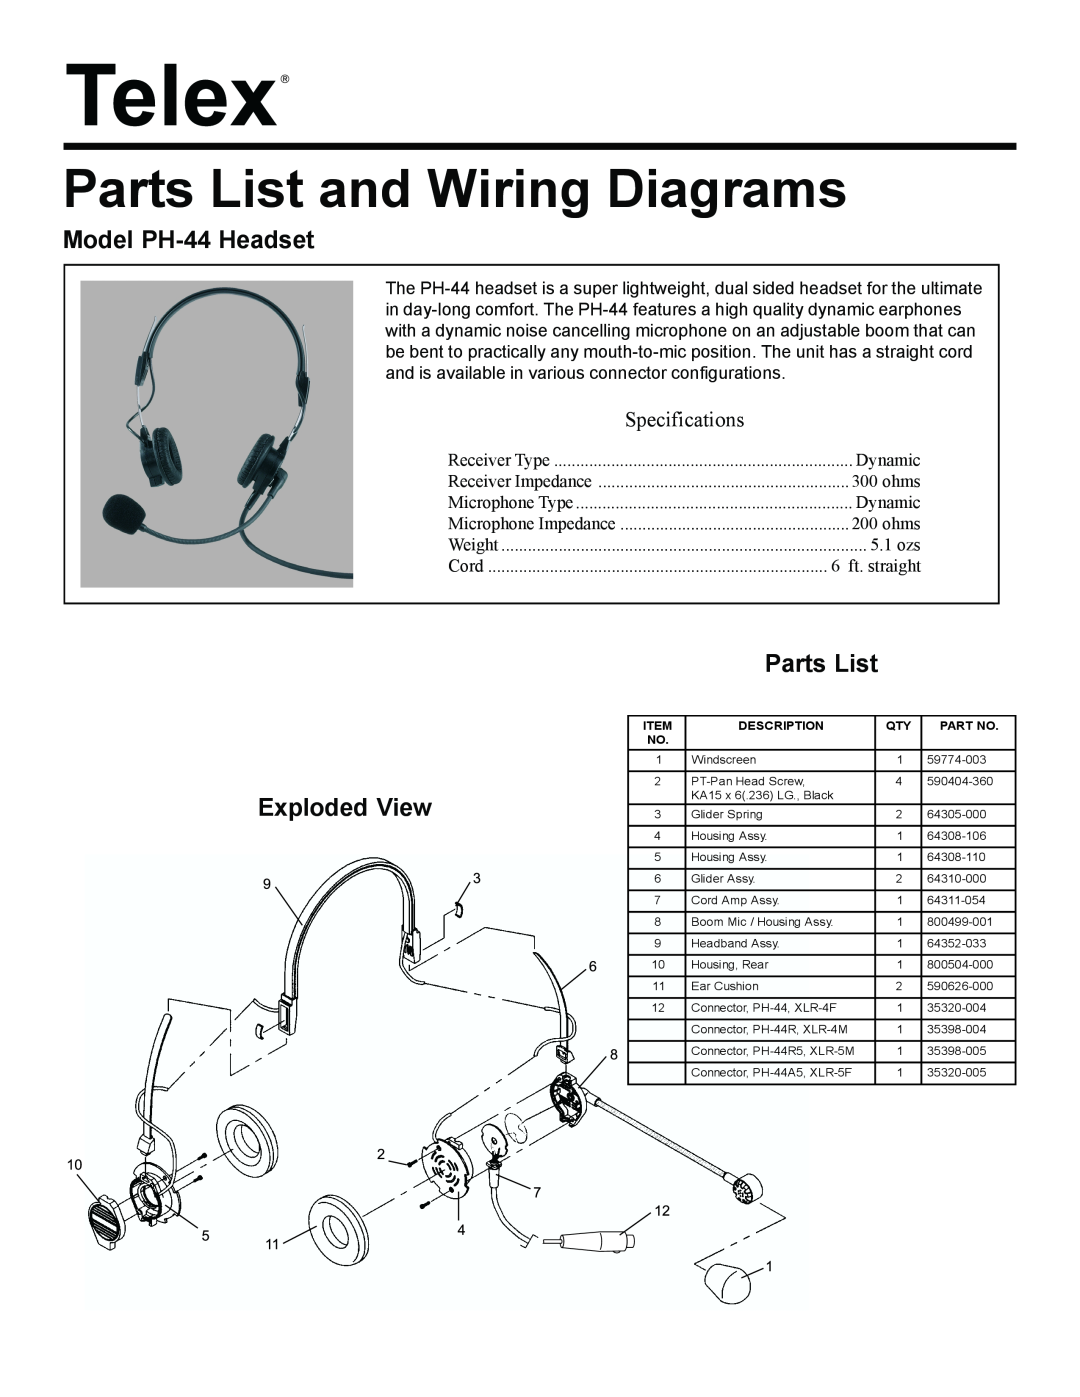 Telex specifications Model PH-44Headset, Exploded View, Parts List and Wiring Diagrams, Specifications 